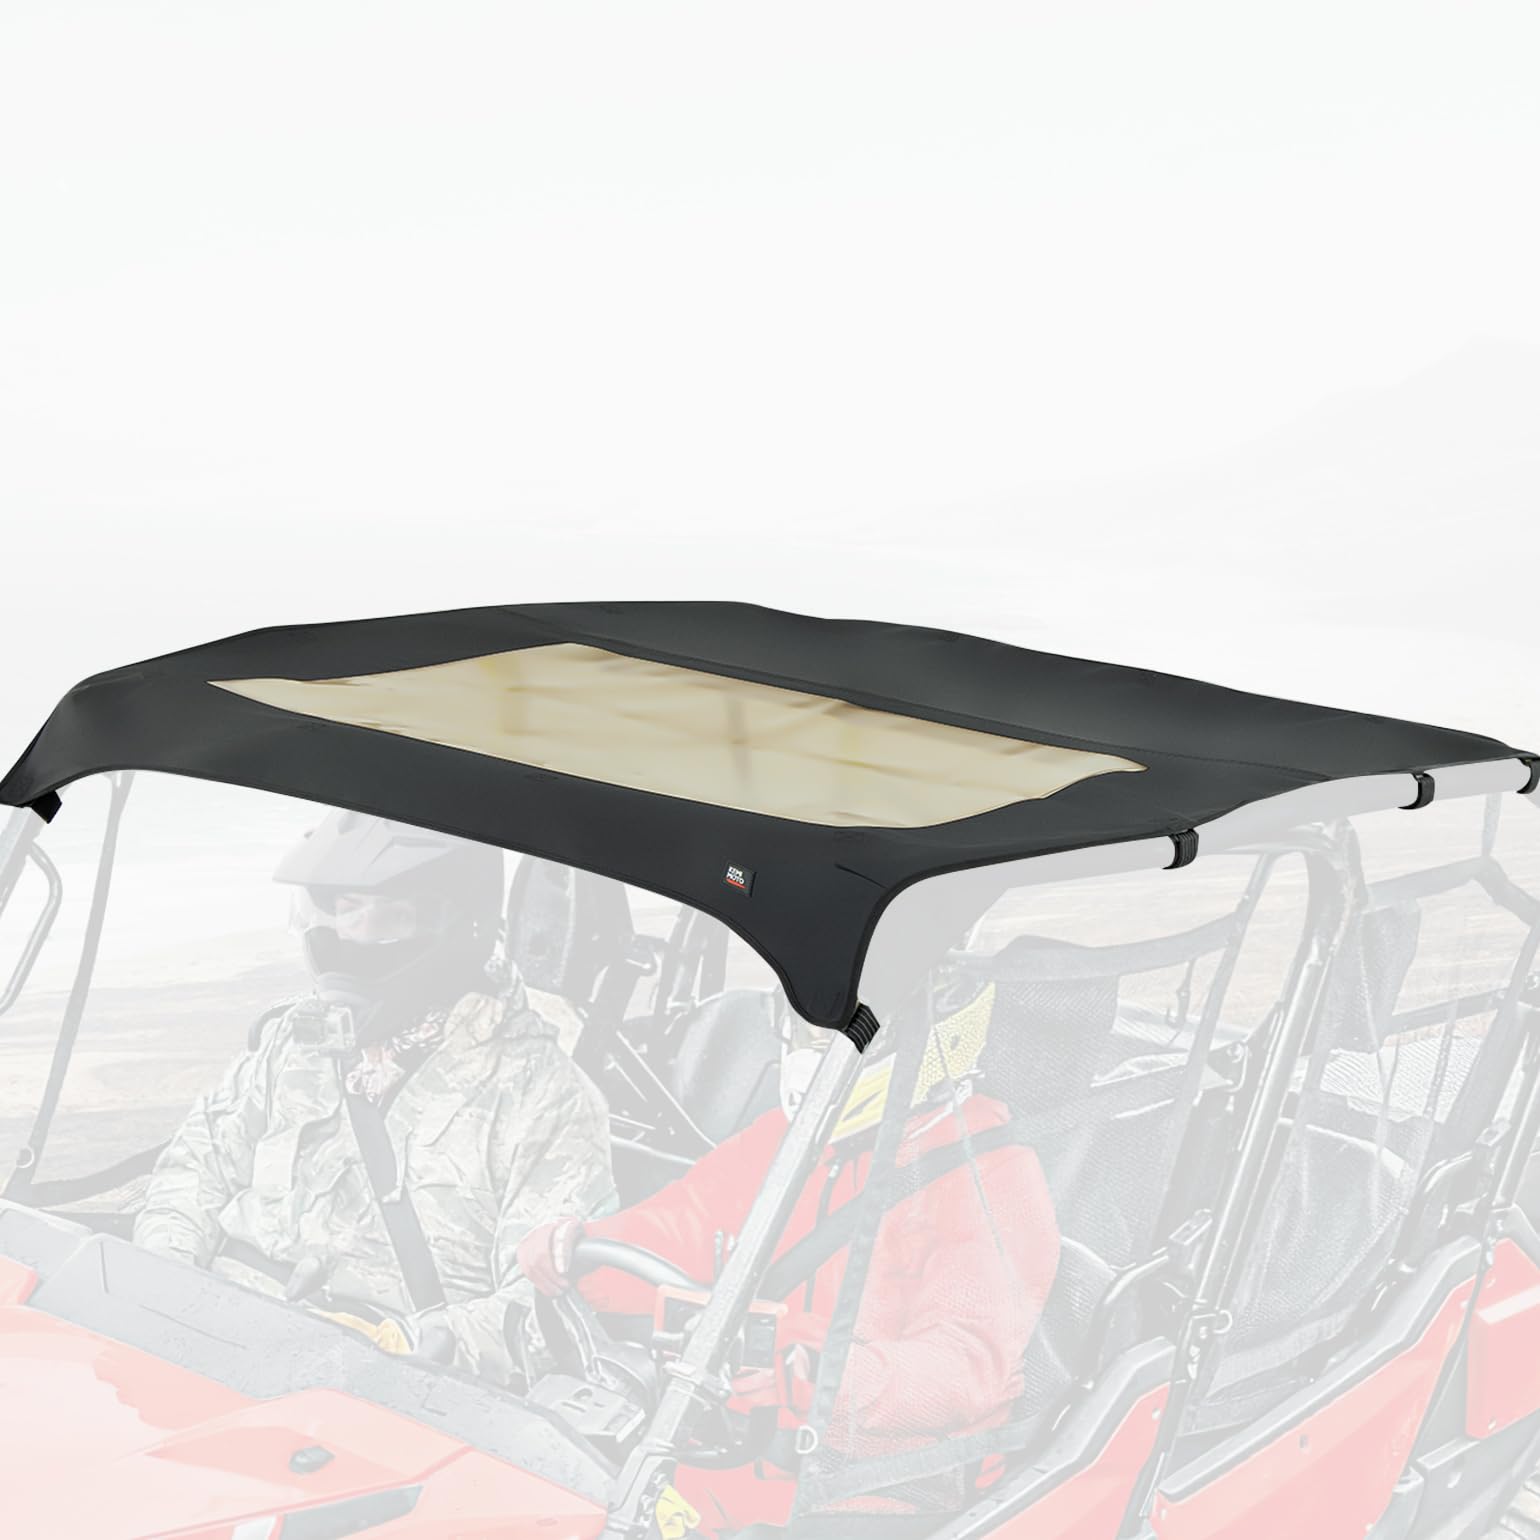 Soft Top Water-Resistant Roof Top For Pioneer 1000-6 - Kemimoto